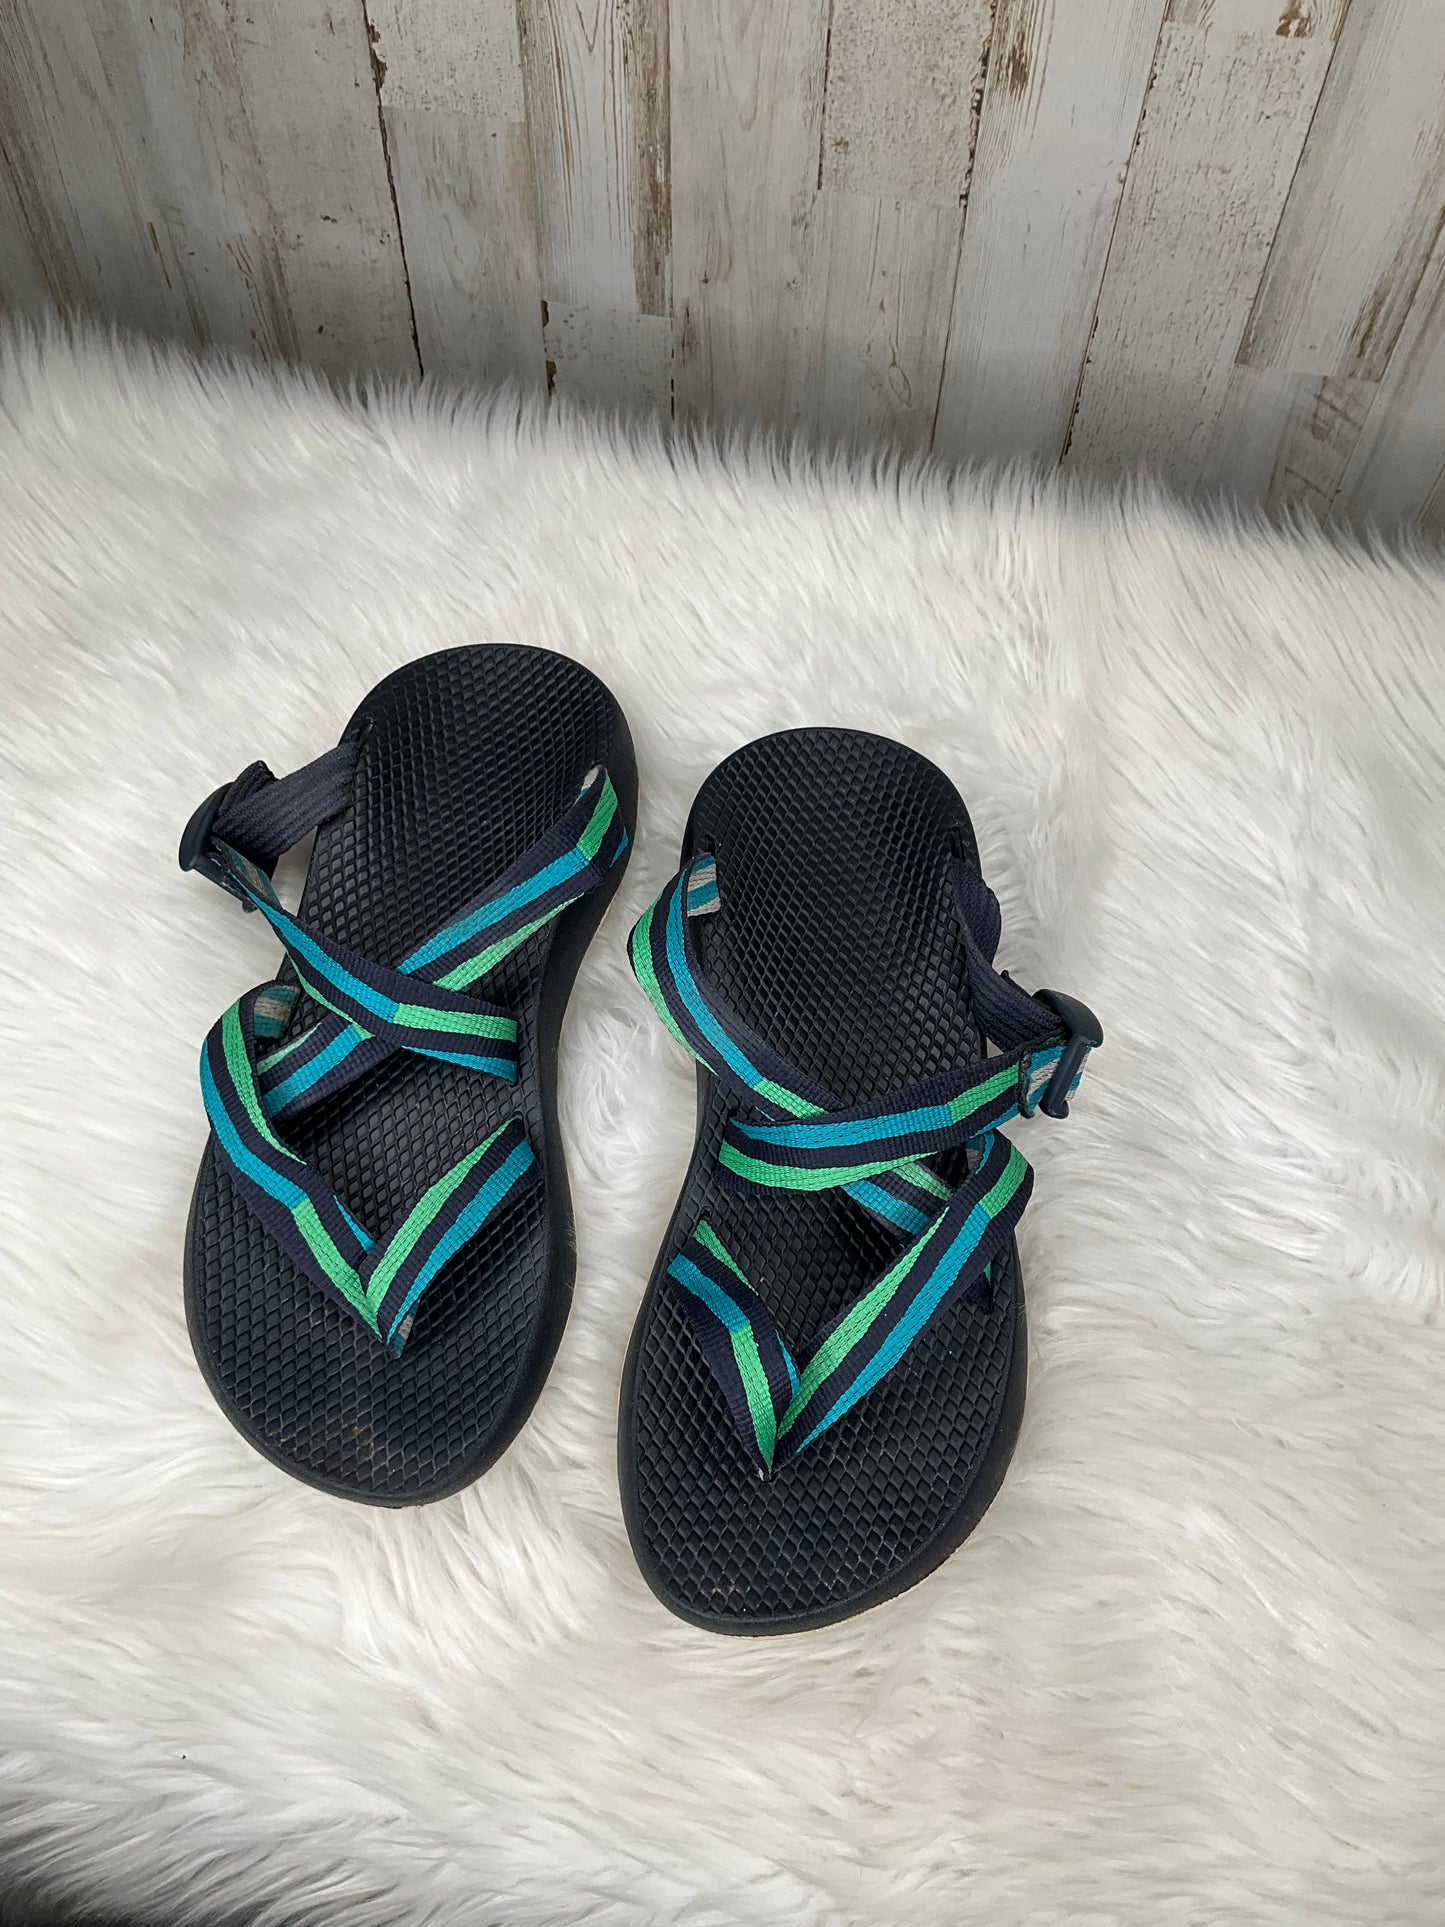 Sandals Flats By Chacos  Size: 7